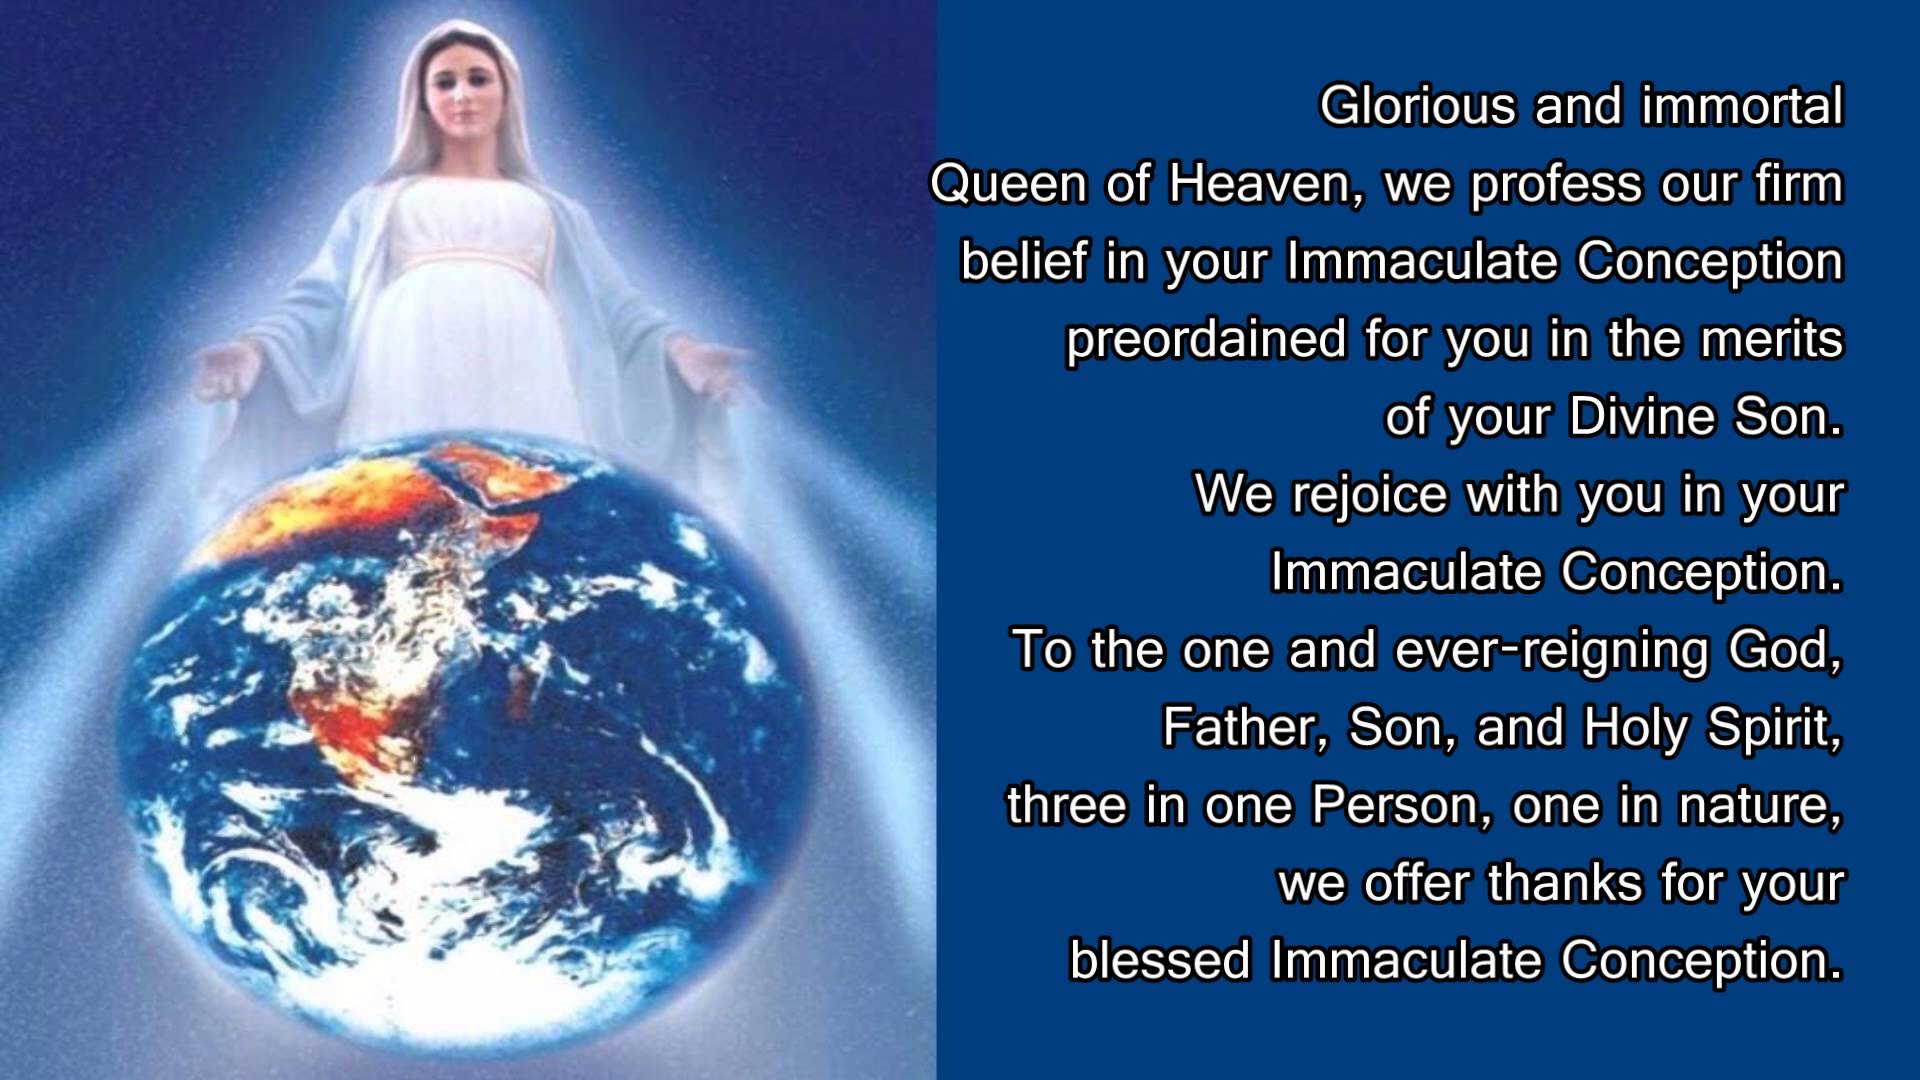 NOVENA TO THE IMMACULATE CONCEPTION, Day 6